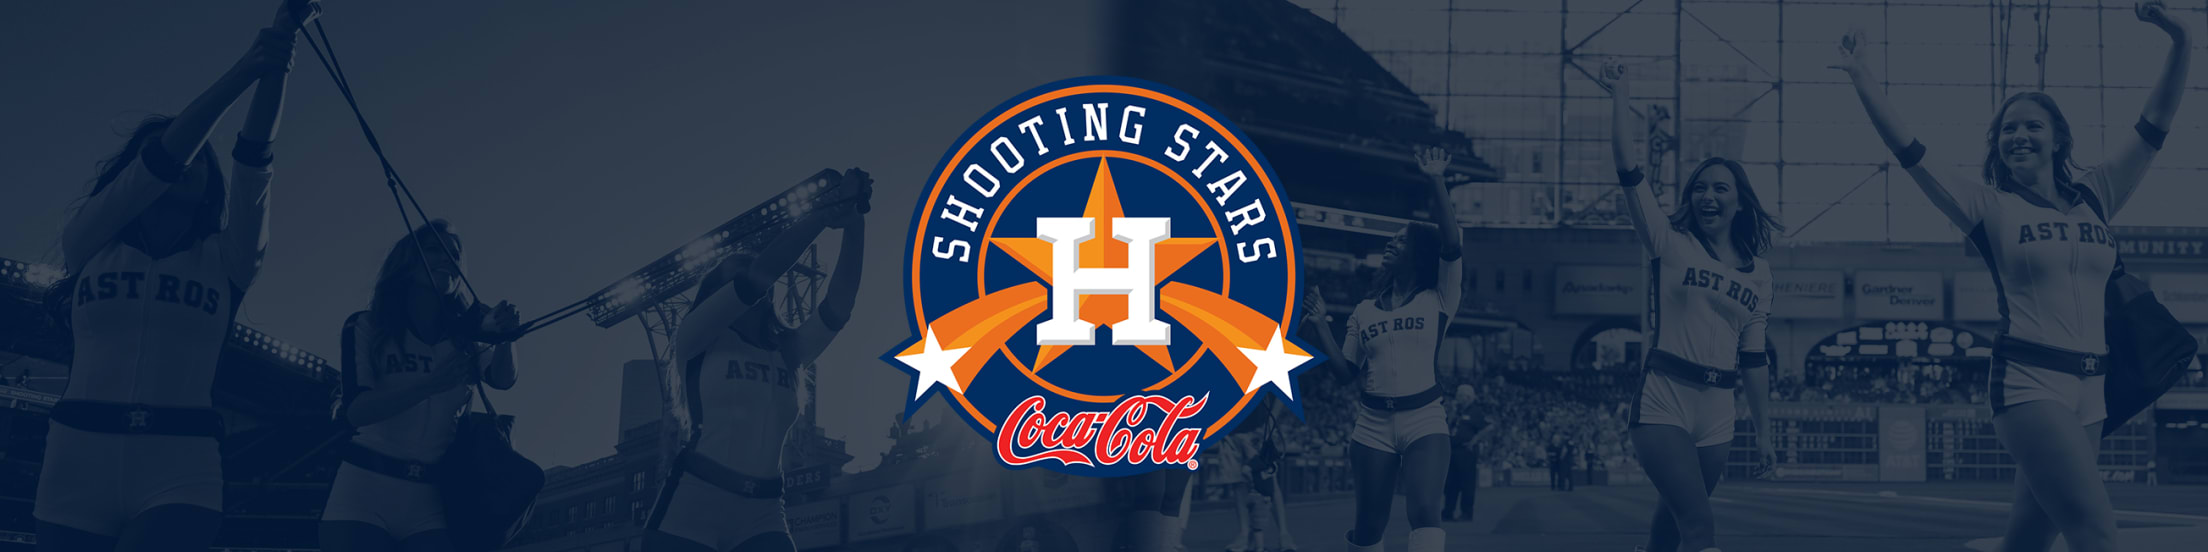 AstrosShootingStars on X: Future Shooting Star at the Hispanic Heritage  Street Festival today! #Astros  / X